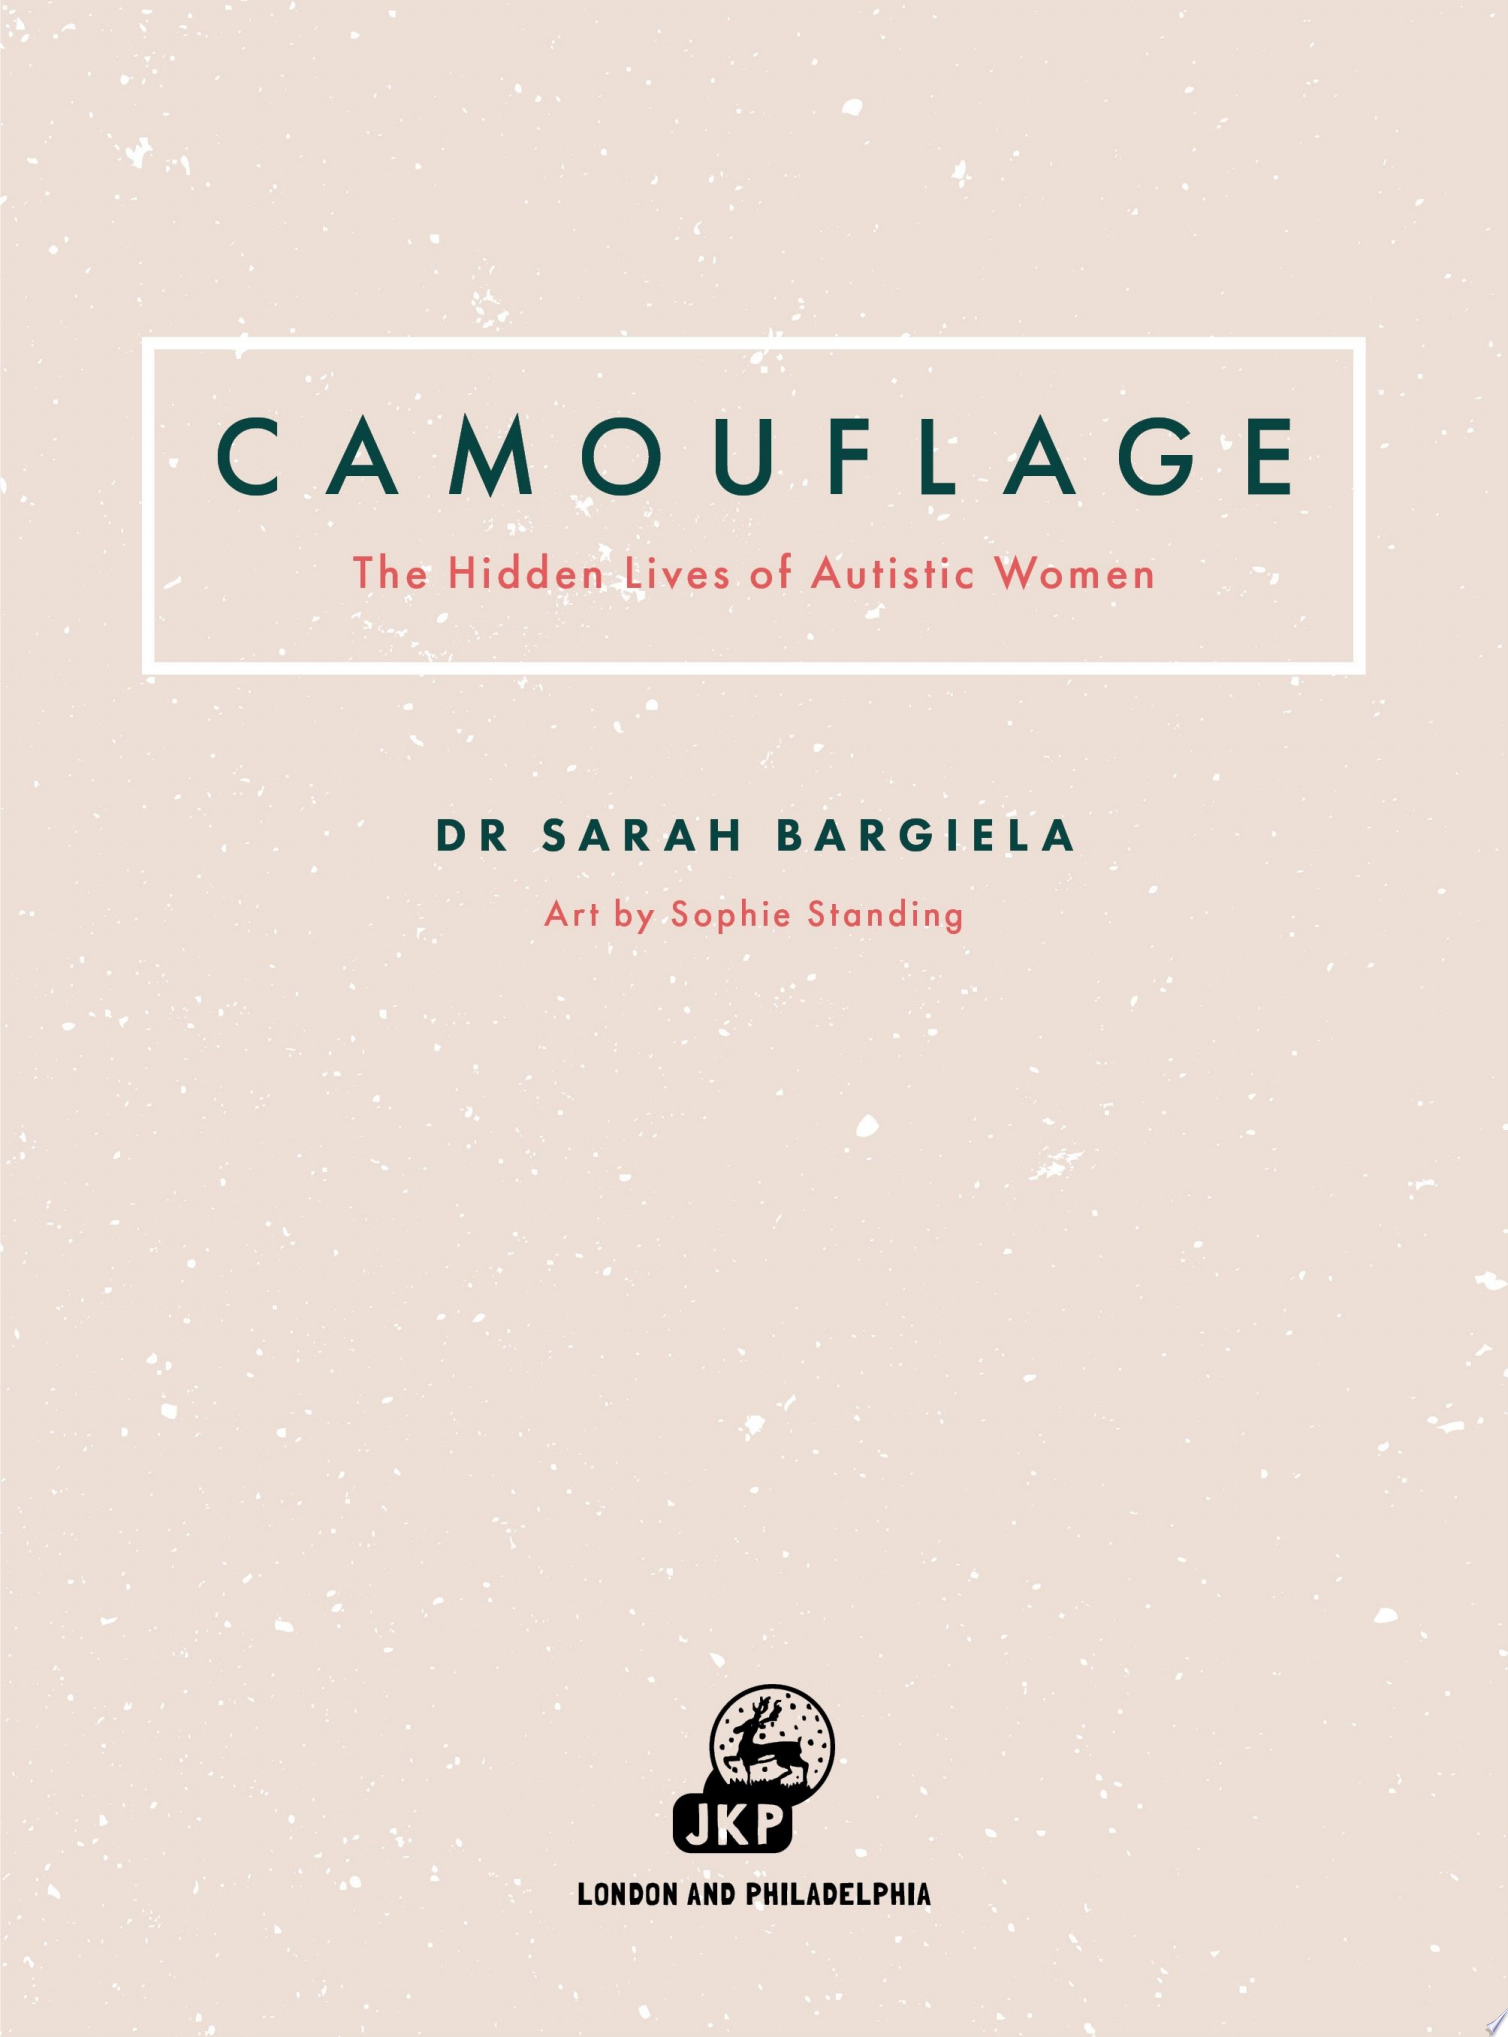 Image for "Camouflage"